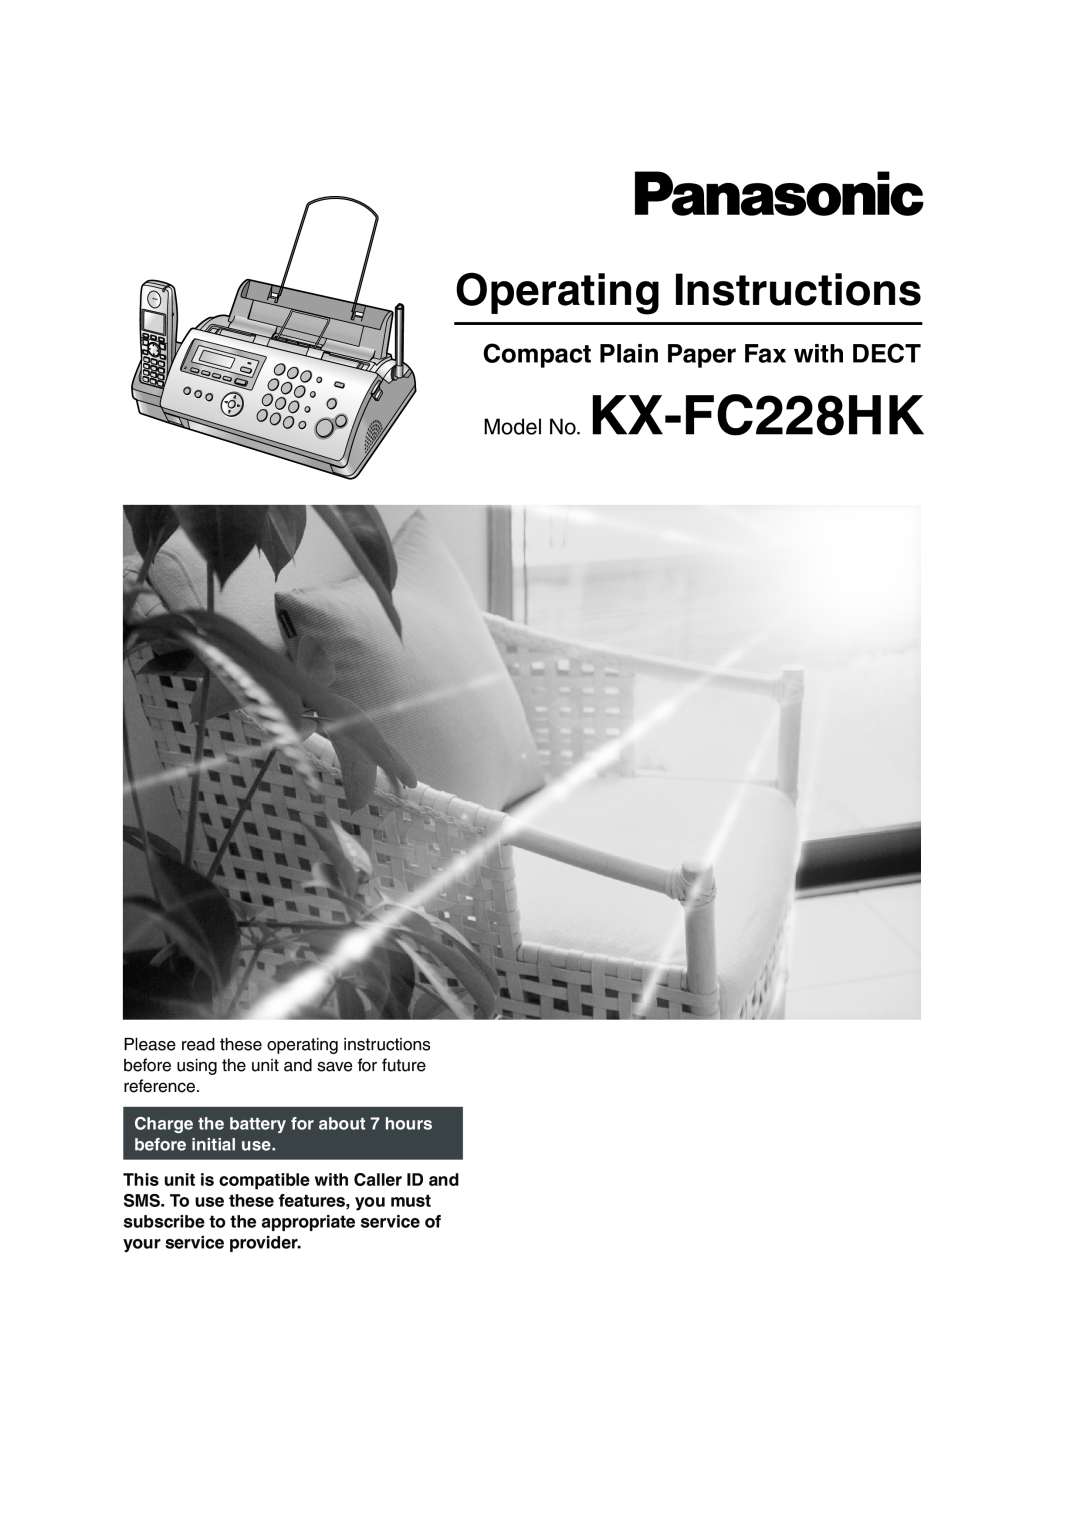 Panasonic KX-FC228HK operating instructions Compact Plain Paper Fax with DECT, Operating Instructions 